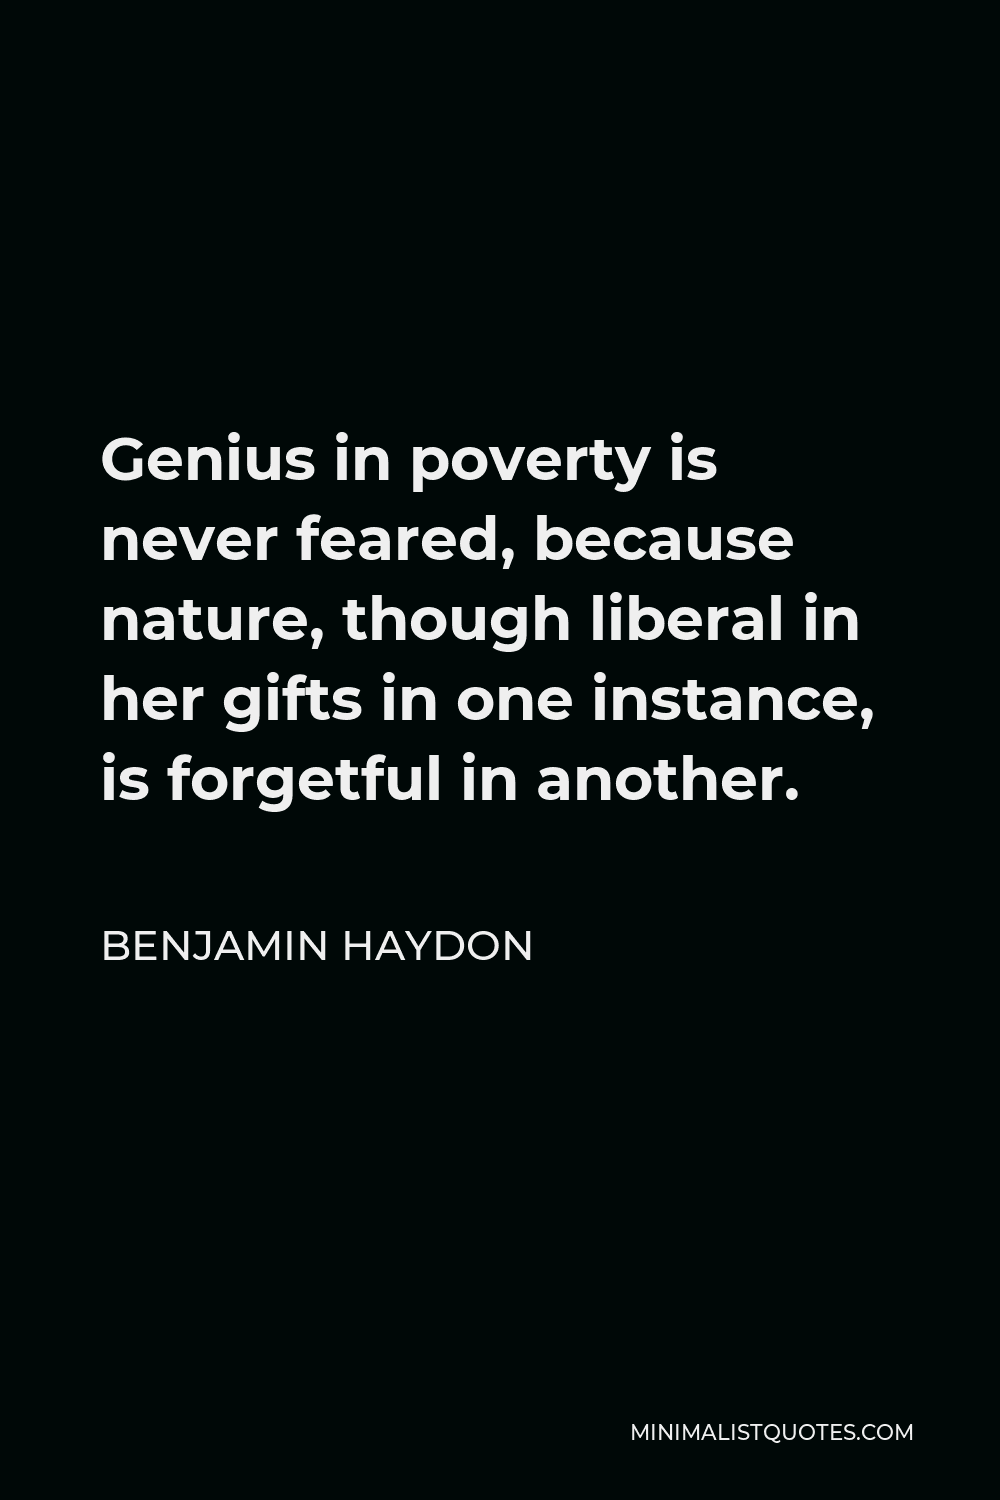 Benjamin Haydon Quote - Genius in poverty is never feared, because nature, though liberal in her gifts in one instance, is forgetful in another.